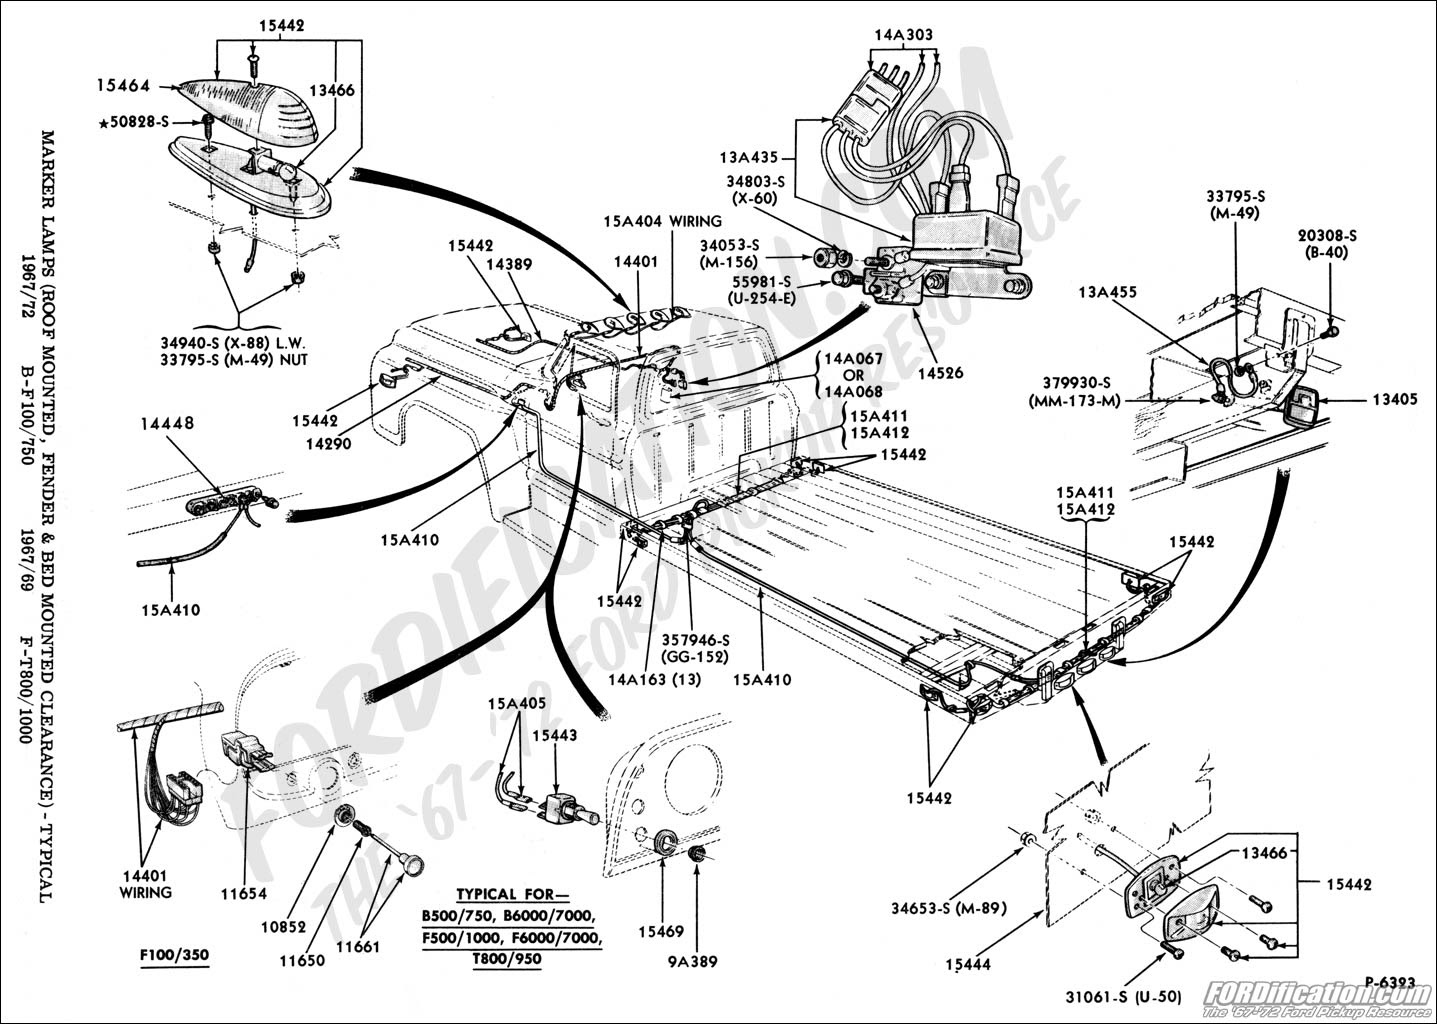 Transmission For 2000 Ford F 250 Wiring Diagram - Complete Wiring Schemas